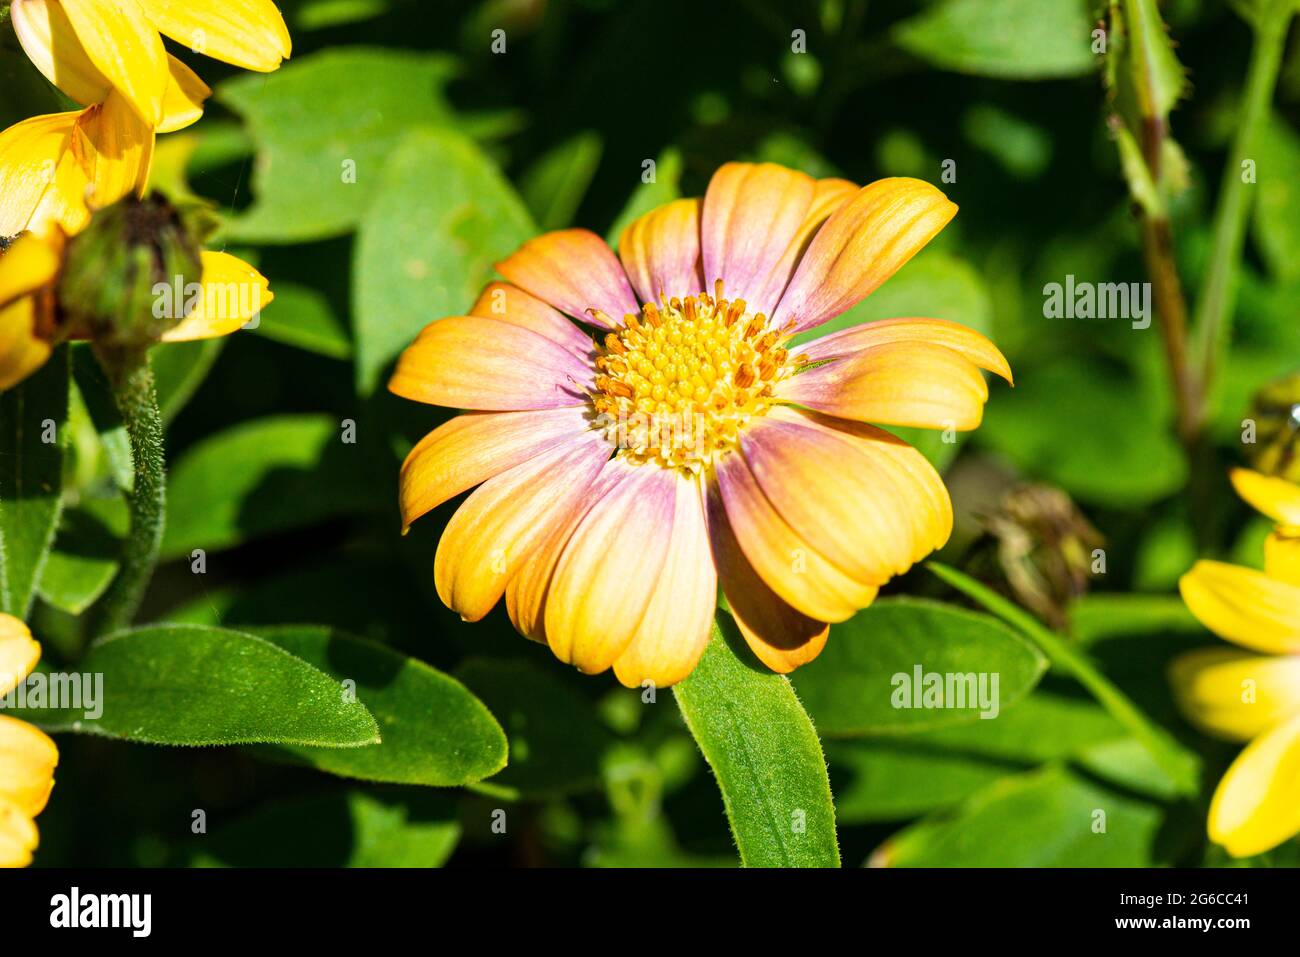 The flower of an Osteospermum Serenity Blushing Beauty Stock Photo